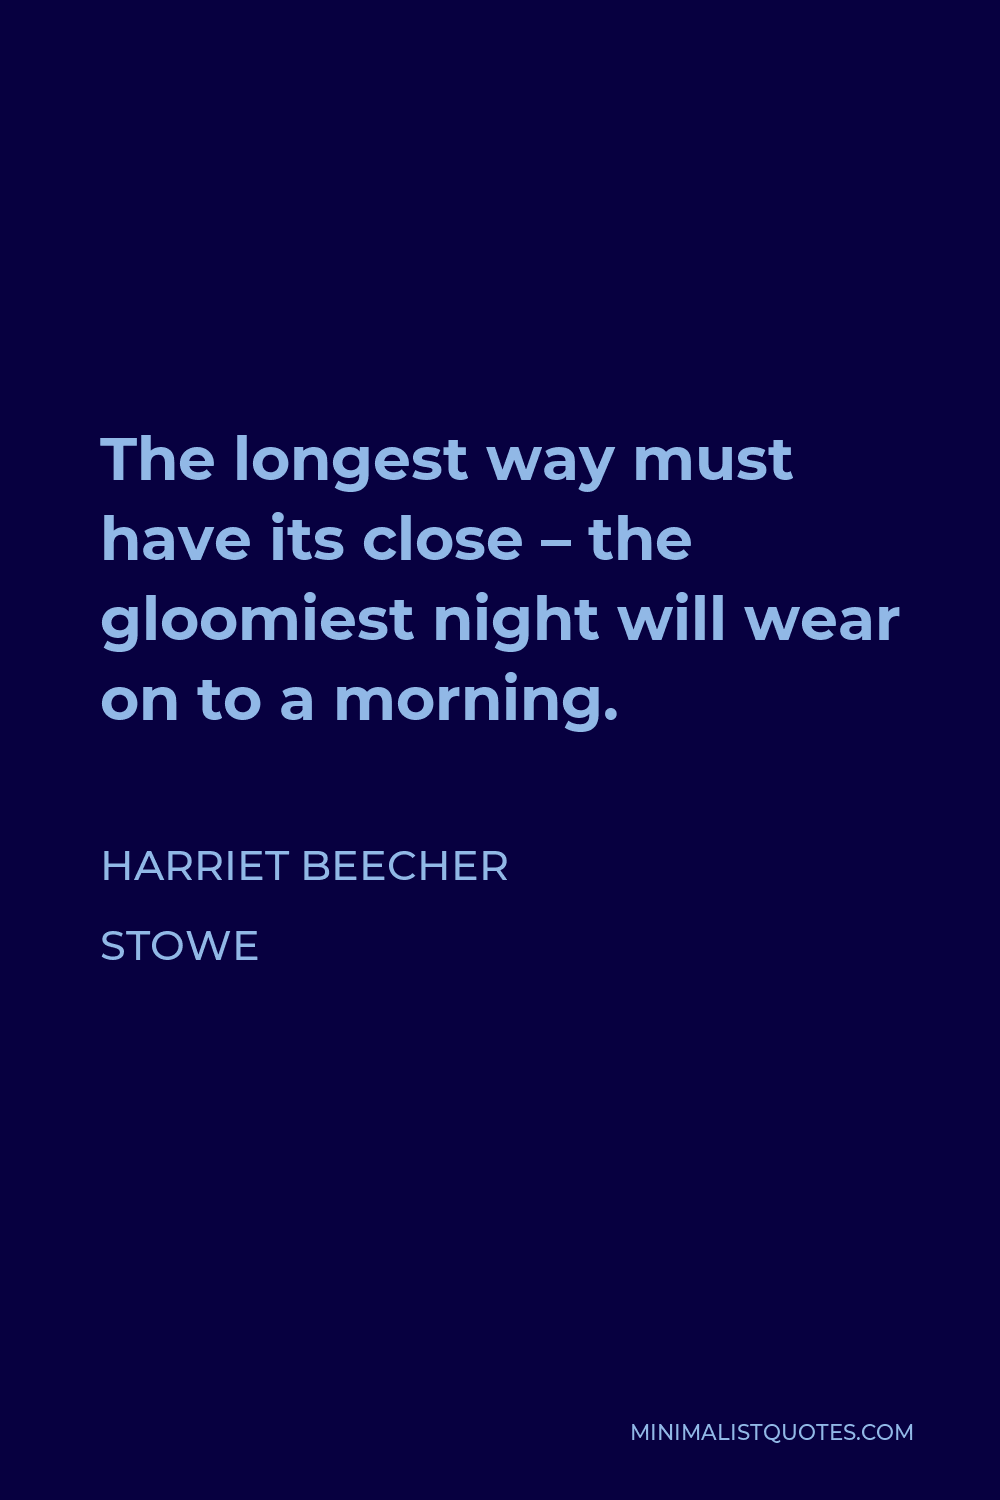 Harriet Beecher Stowe Quote - The longest way must have its close – the gloomiest night will wear on to a morning.